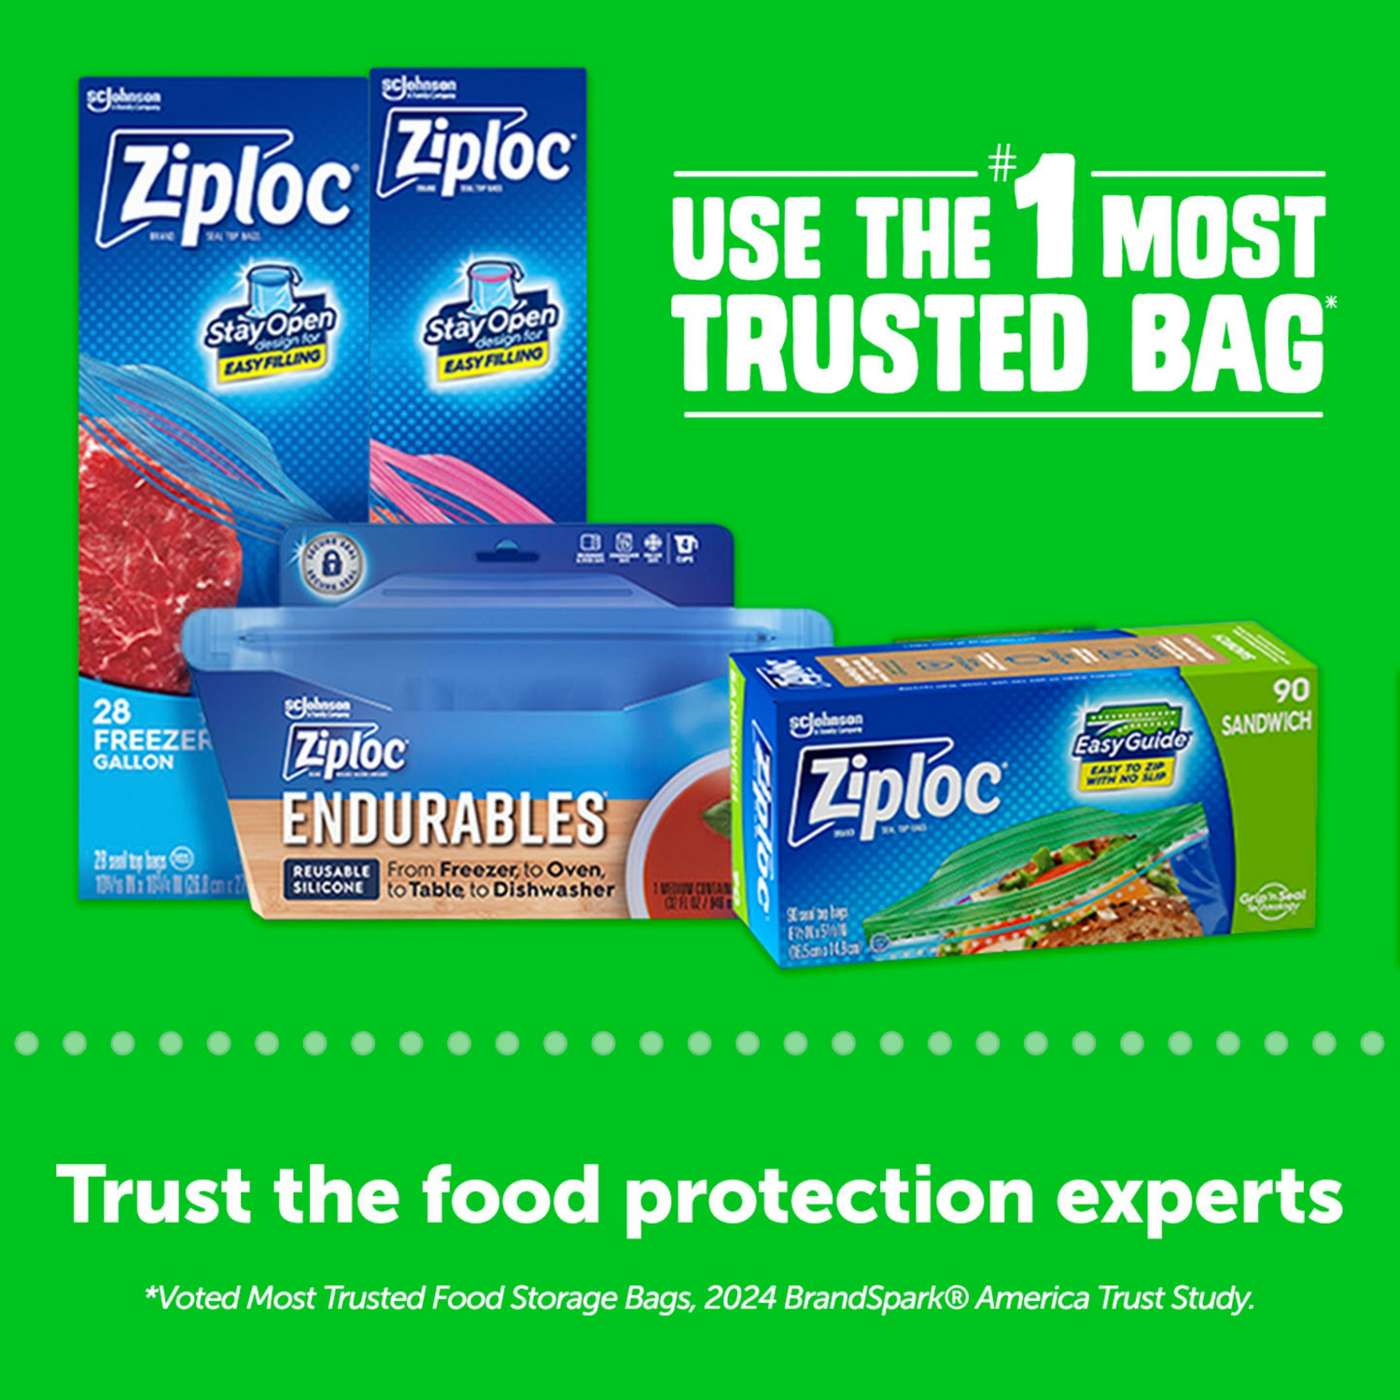 Ziploc Snack Bags with EasyGuide; image 7 of 7